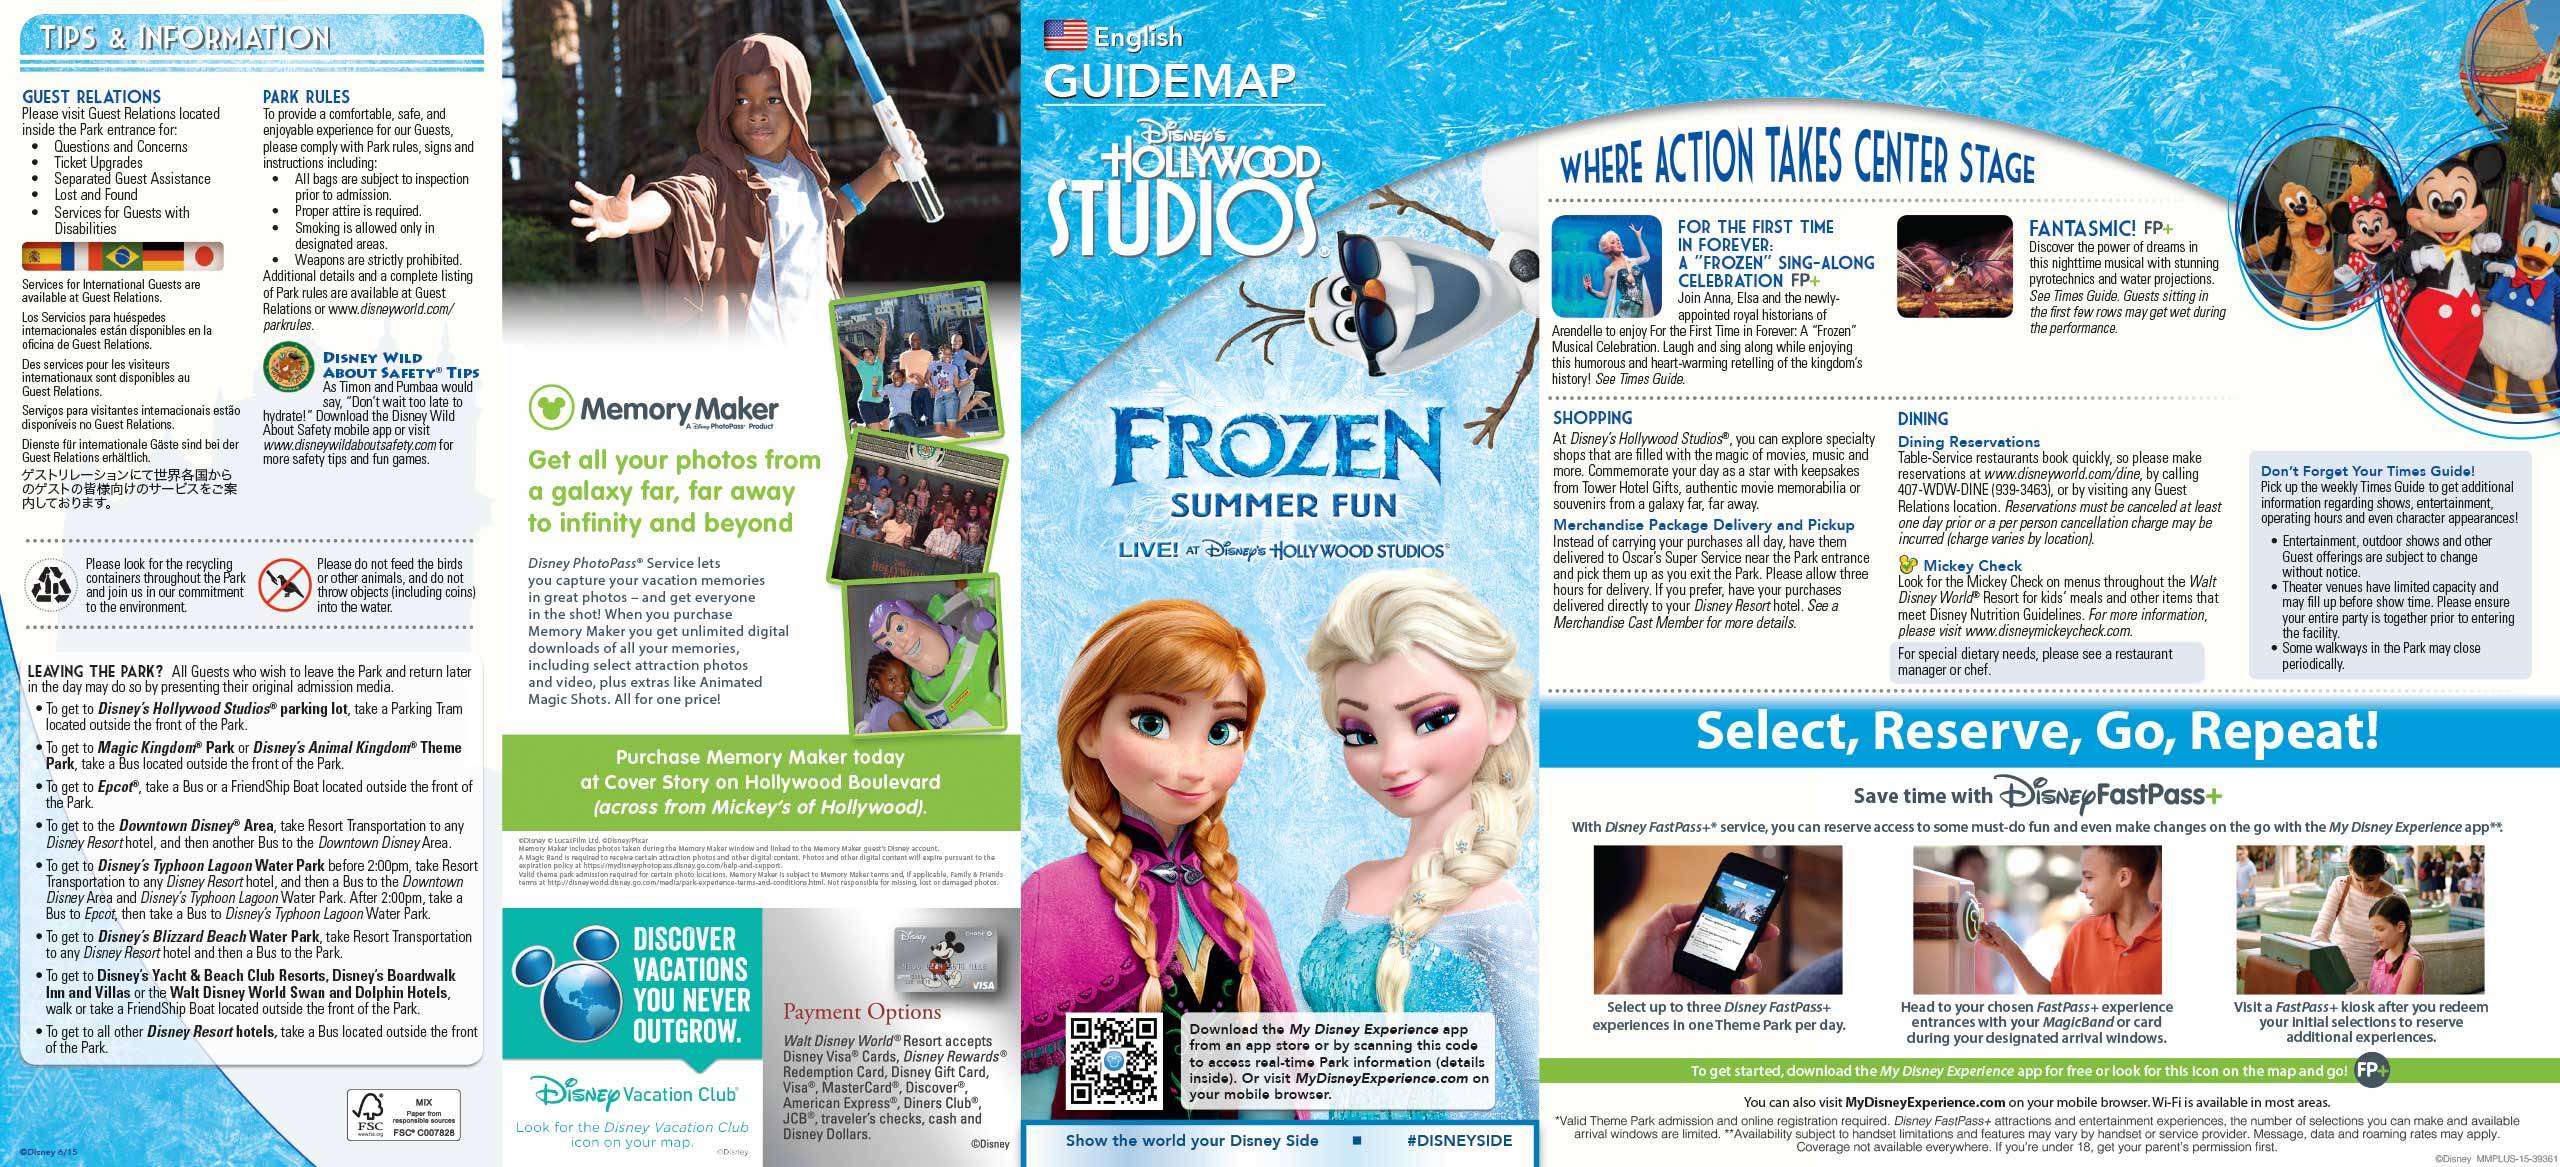 Disney's Hollywood Studios Guide Map May 2015 - Front